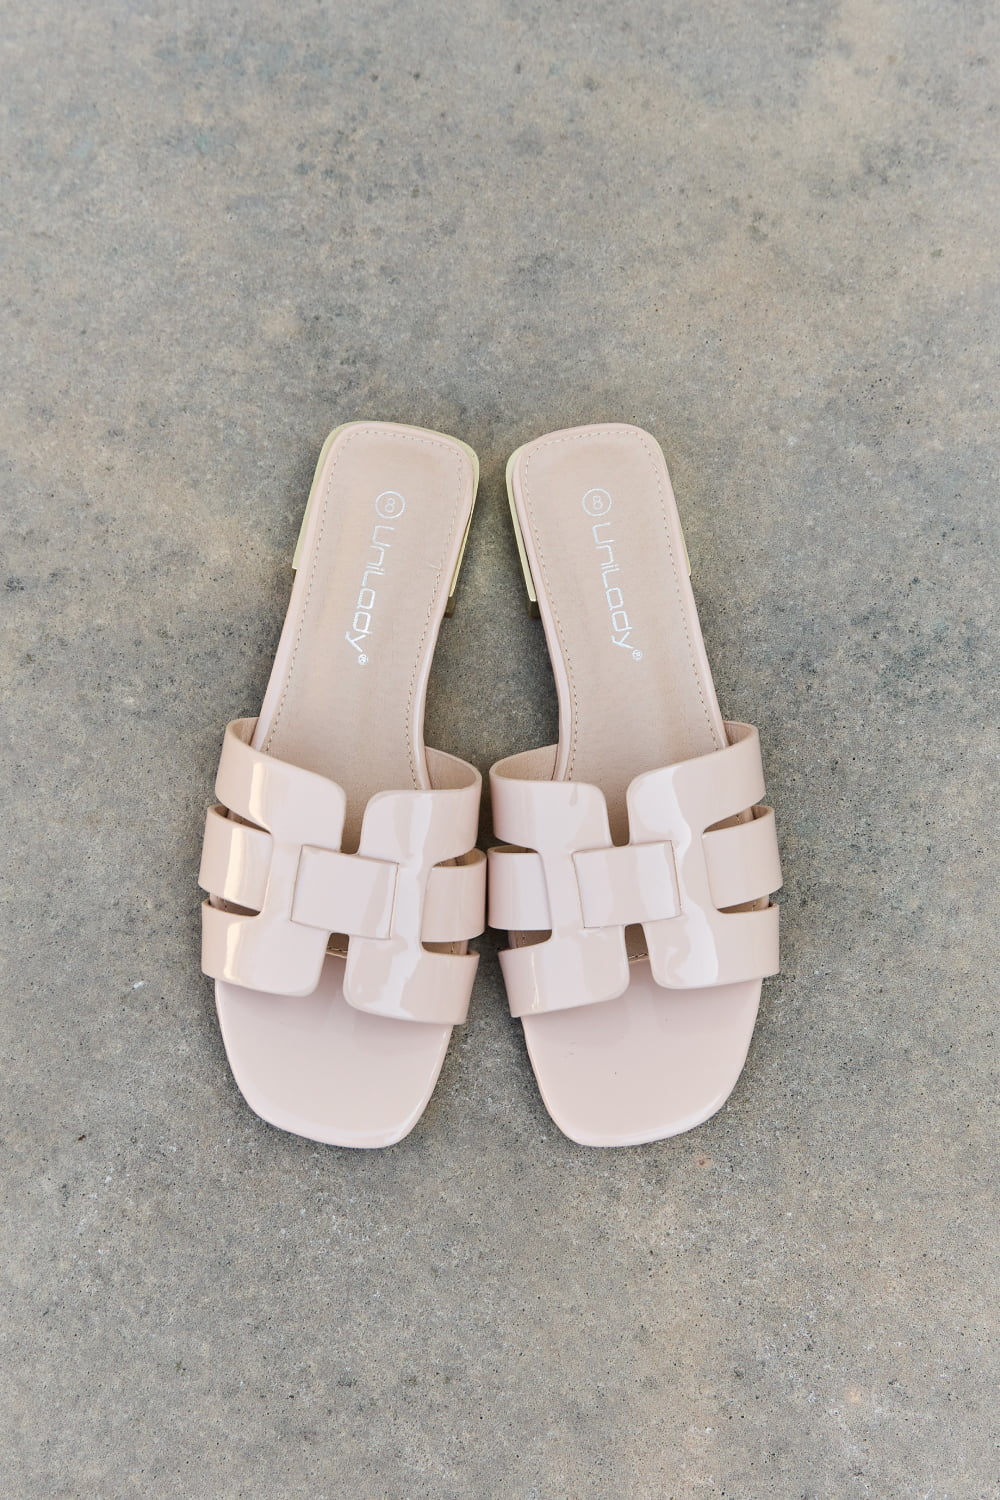 Weeboo Walk It Out Slide Sandals in Nude - Fashion Girl Online Store